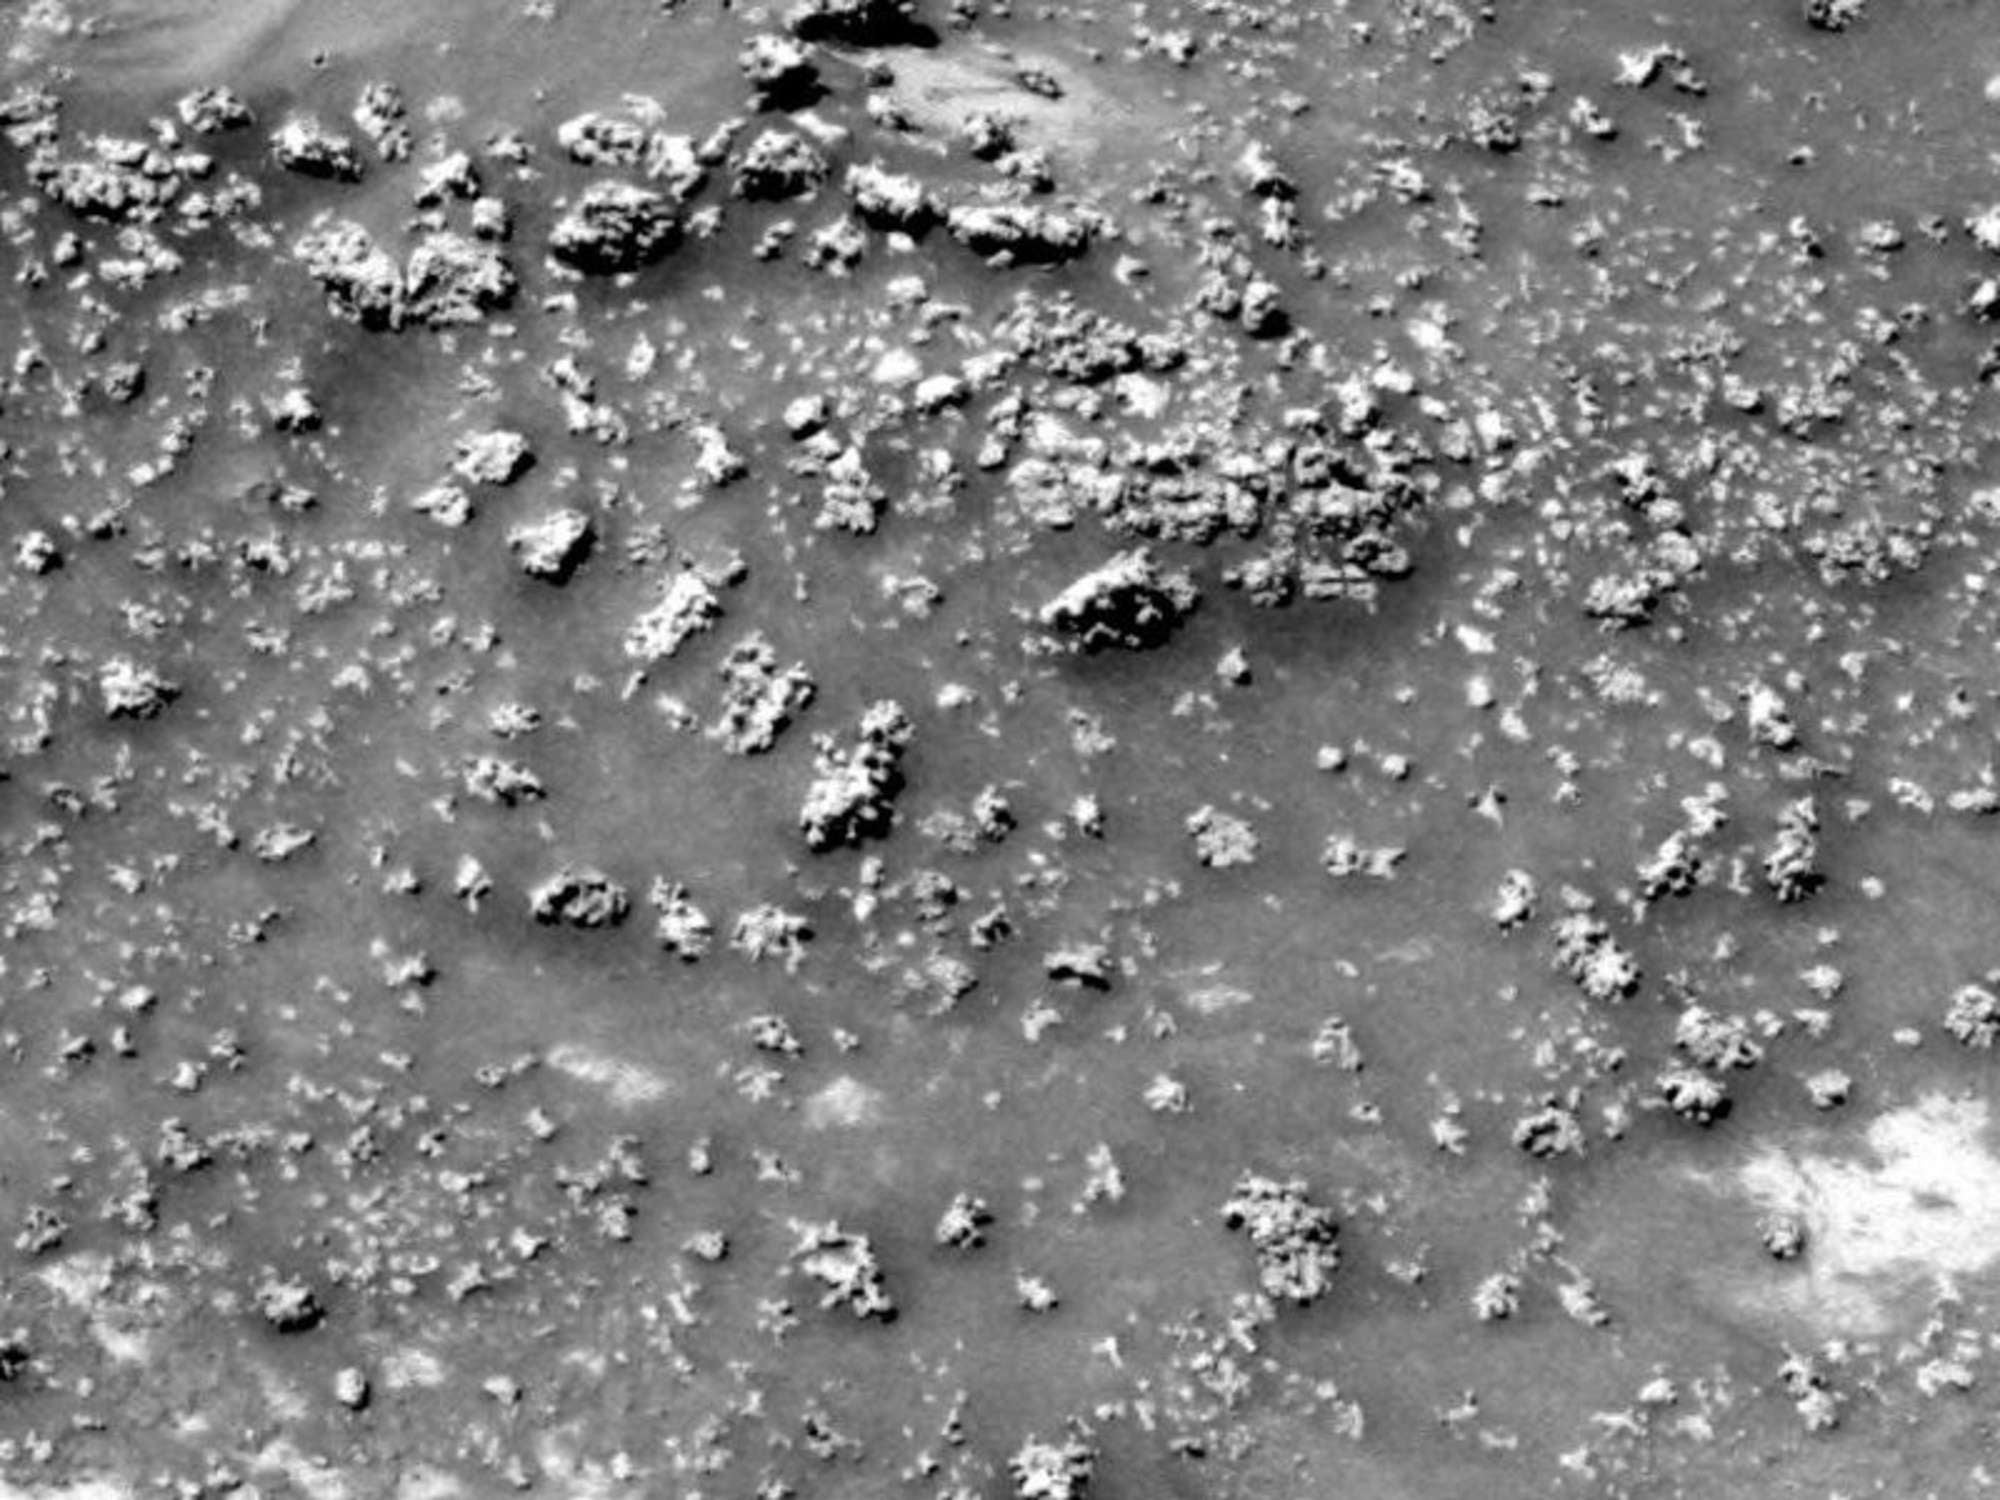 An image taken by the Nasa Spirit rover, which shows the silica protrusions on the surface of Mars